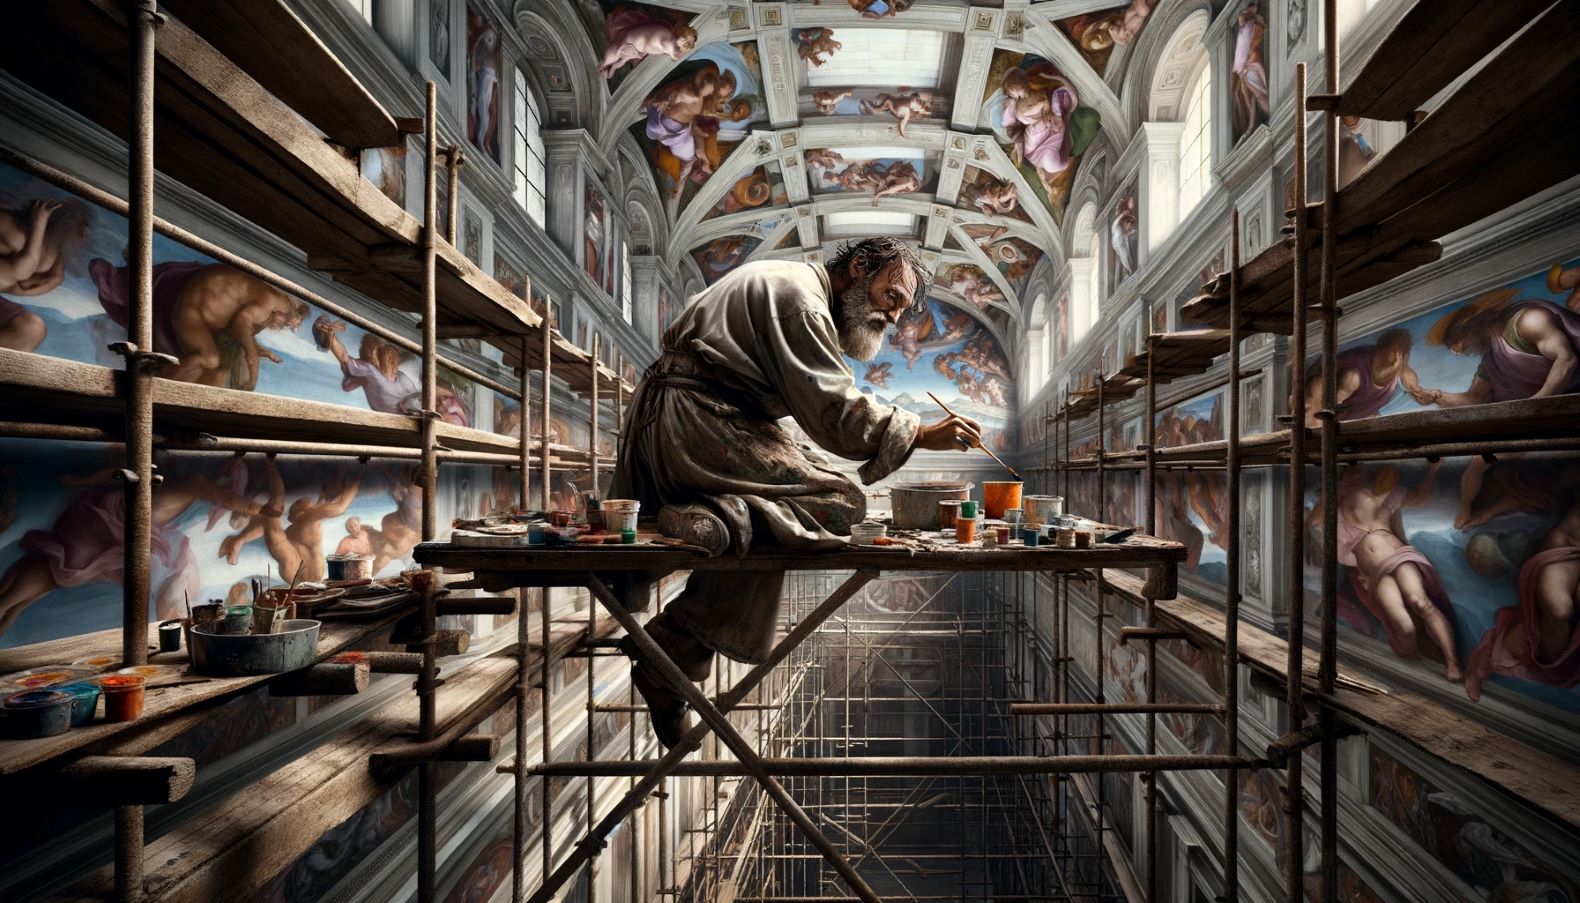 Why Did Michelangelo Paint The Sistine Chapel?